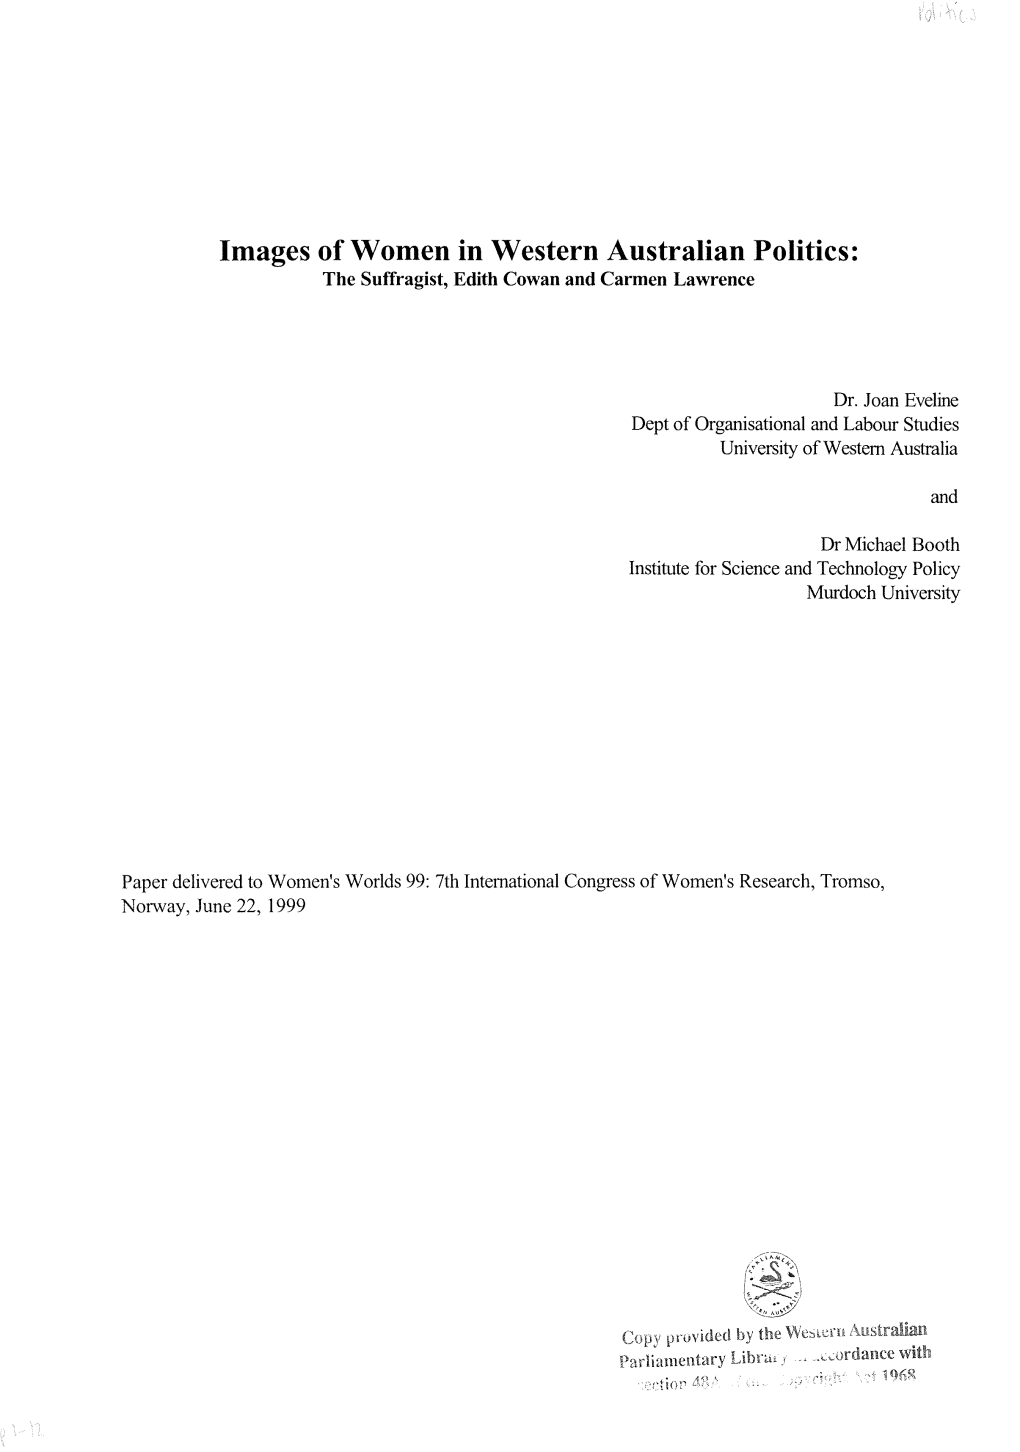 Images of Women in Western Australian Politics: the Suffragist, Edith Cowan and Carmen Lawrence